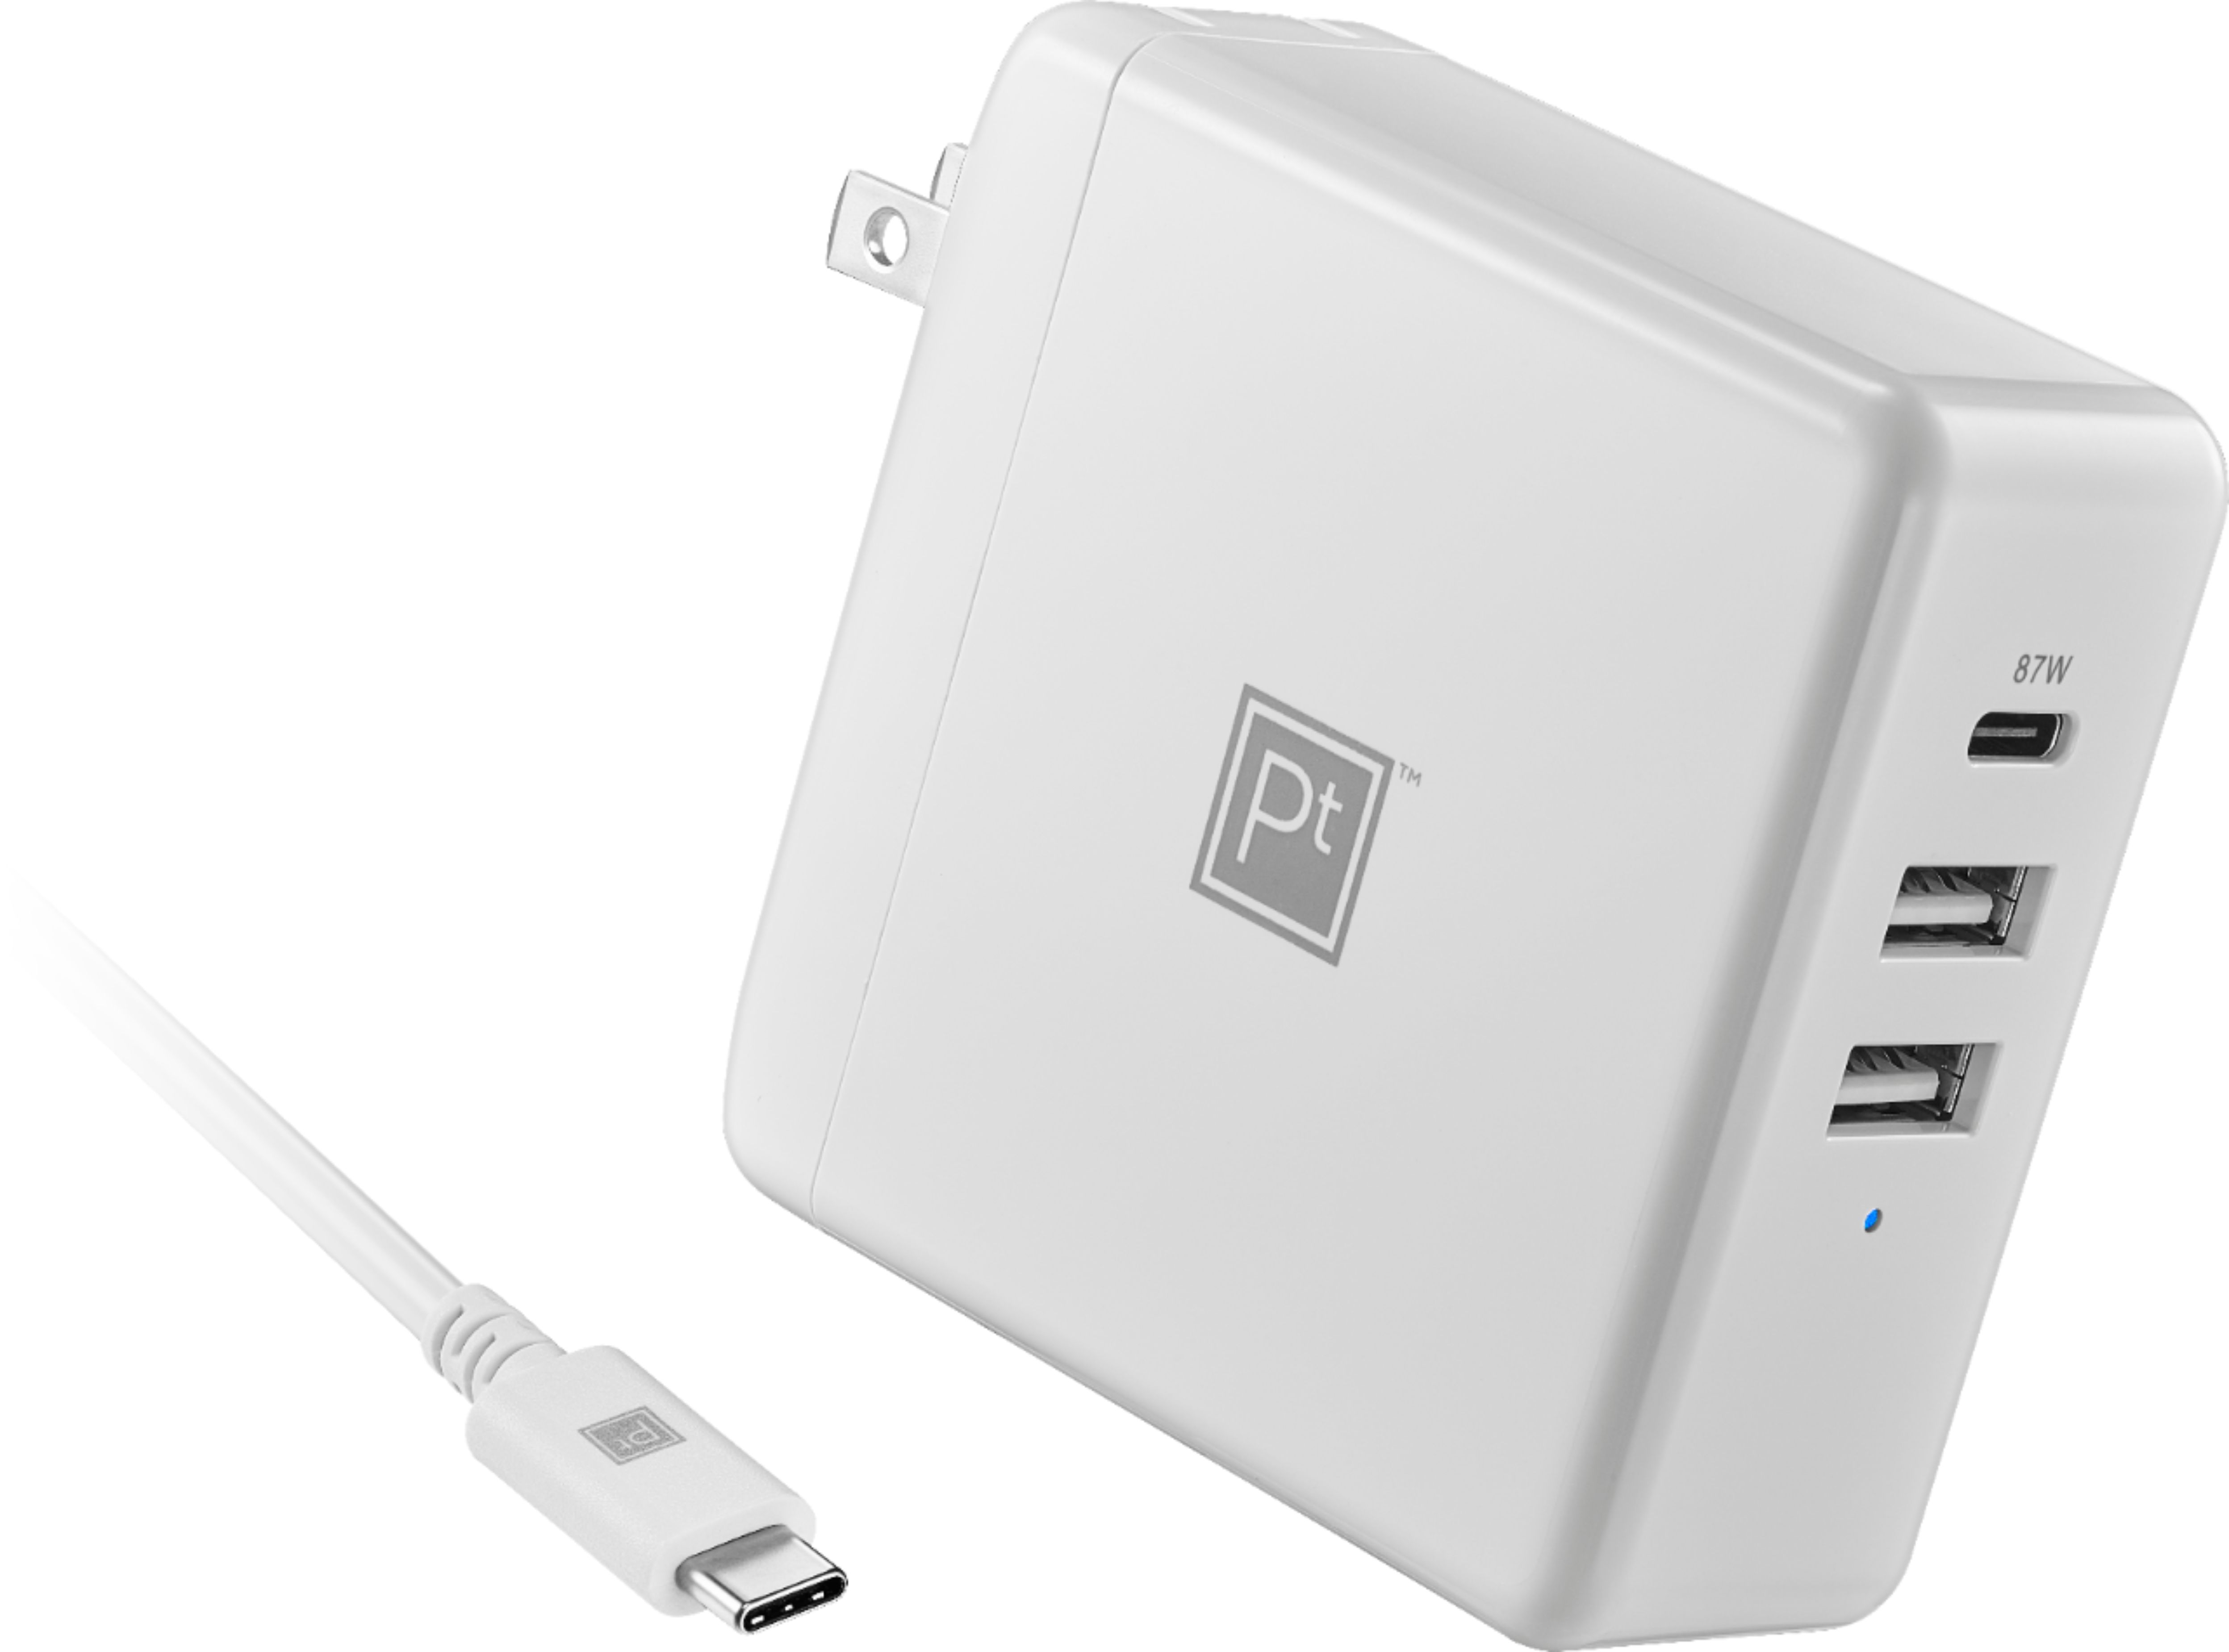 Platinum™ - 95W USB-C Wall Charger with USB-C Cable and 2 USB Ports for MacBook, Chromebook or Laptops with USB-C - White